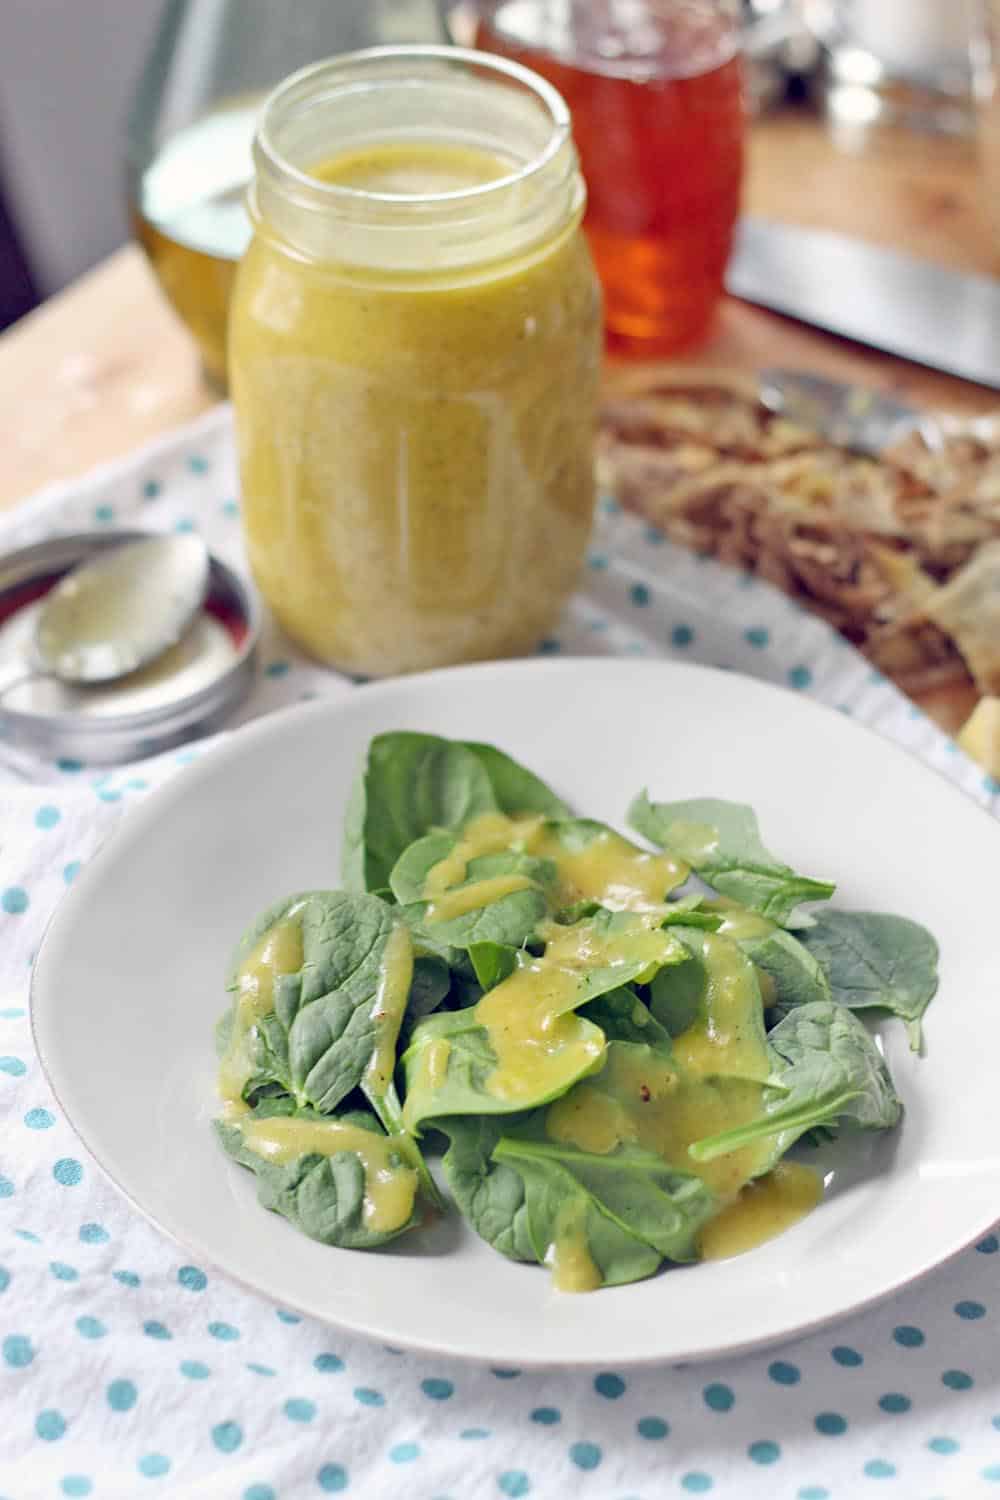 White plate holding greens drizzled with Fresh Ginger and Honey Mustard Dressing Marinade. A glass jar filled with the dressing/marinade, as well as ingredients, are in the background.